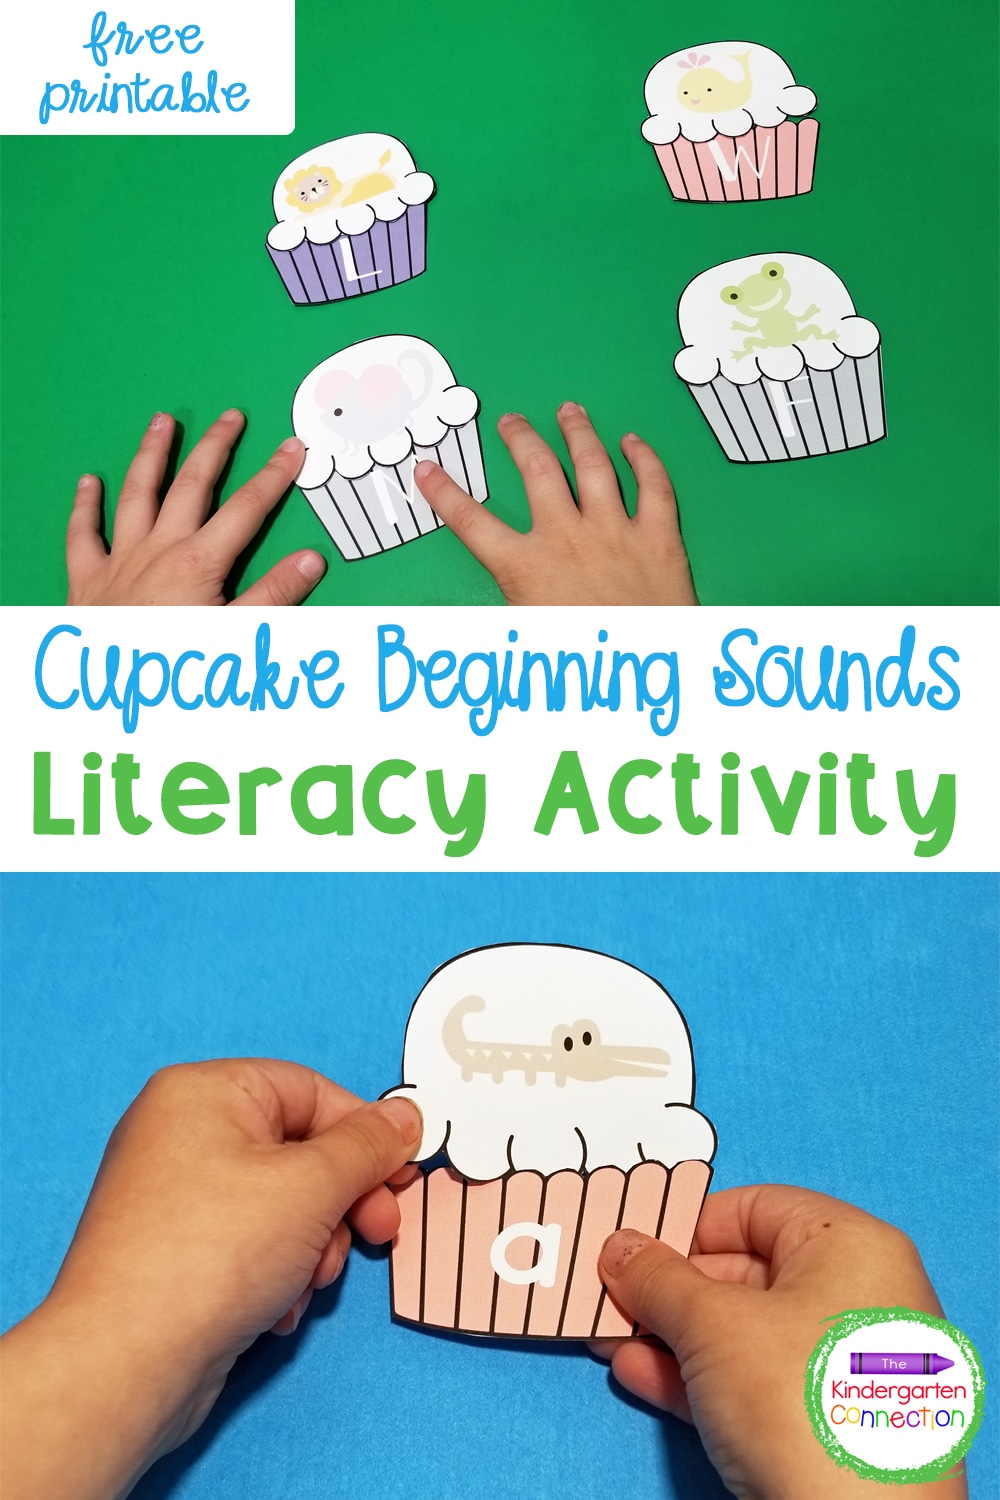 This free Cupcake Beginning Sounds Match is such a fun, printable literacy center for Pre-K & Kindergarten to work on letters and sounds!